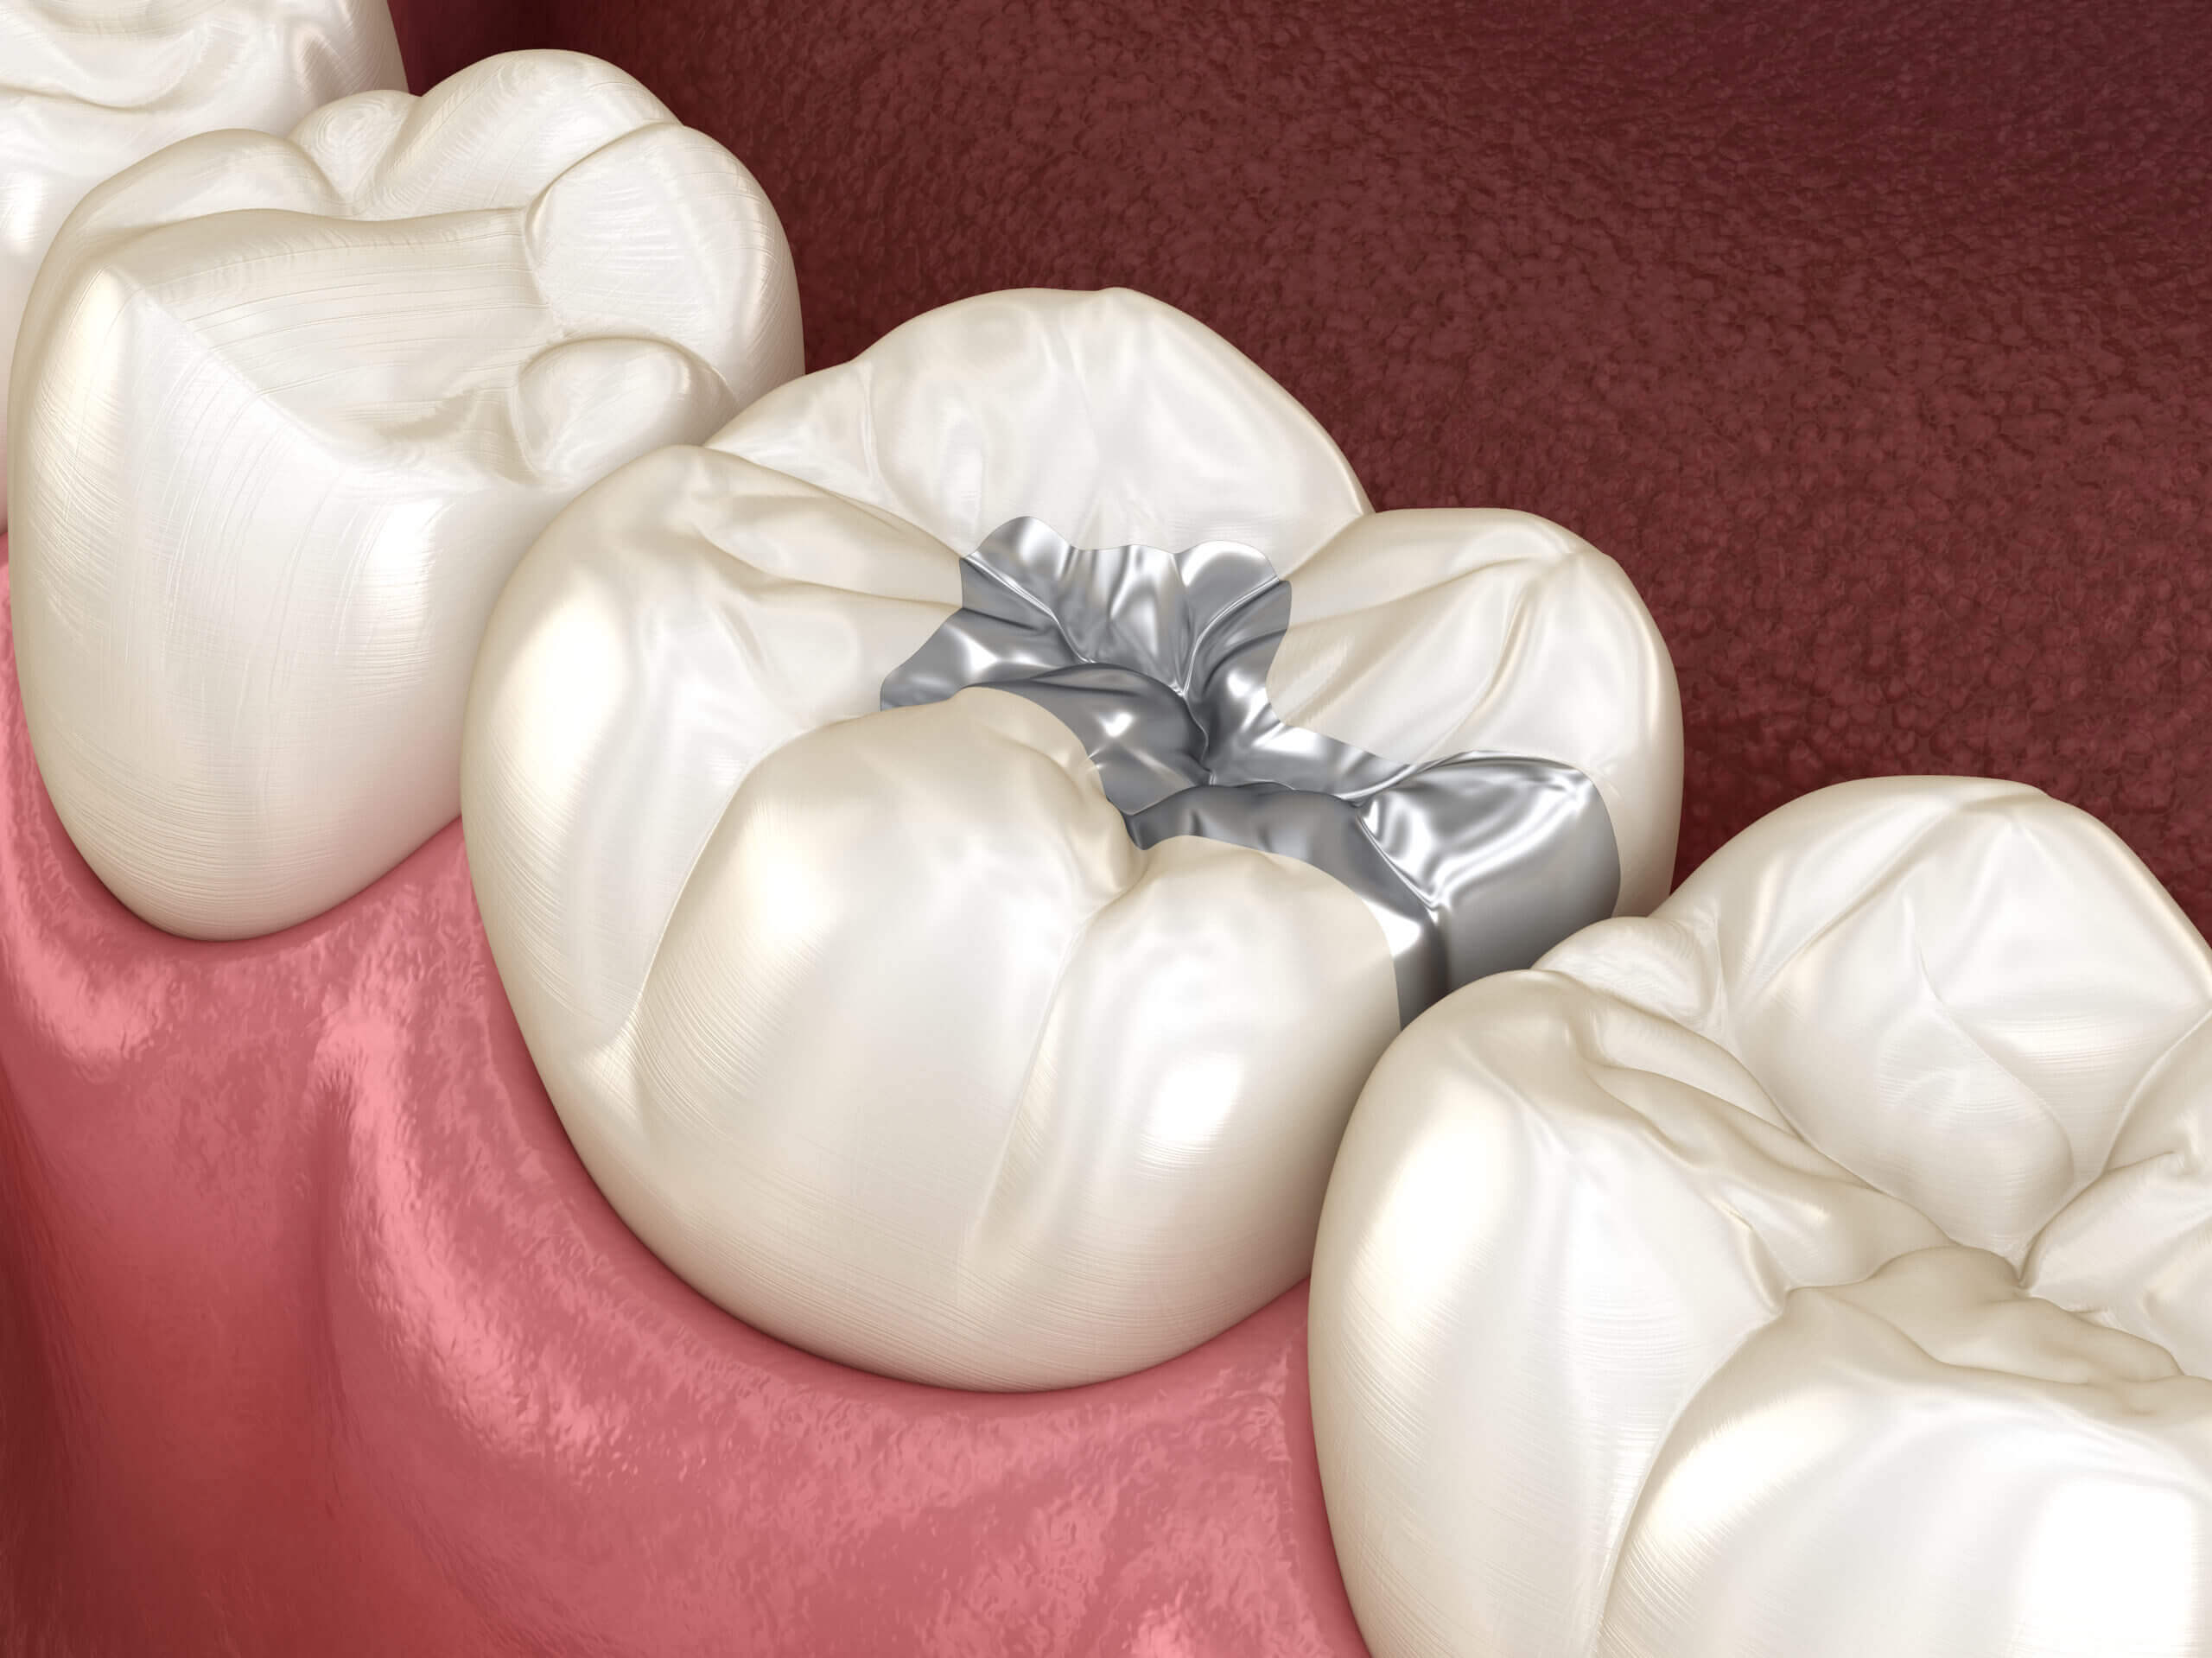 silver fillings Inlay silver crown fixation over tooth. Medically accurate 3D illustration of human teeth treatment